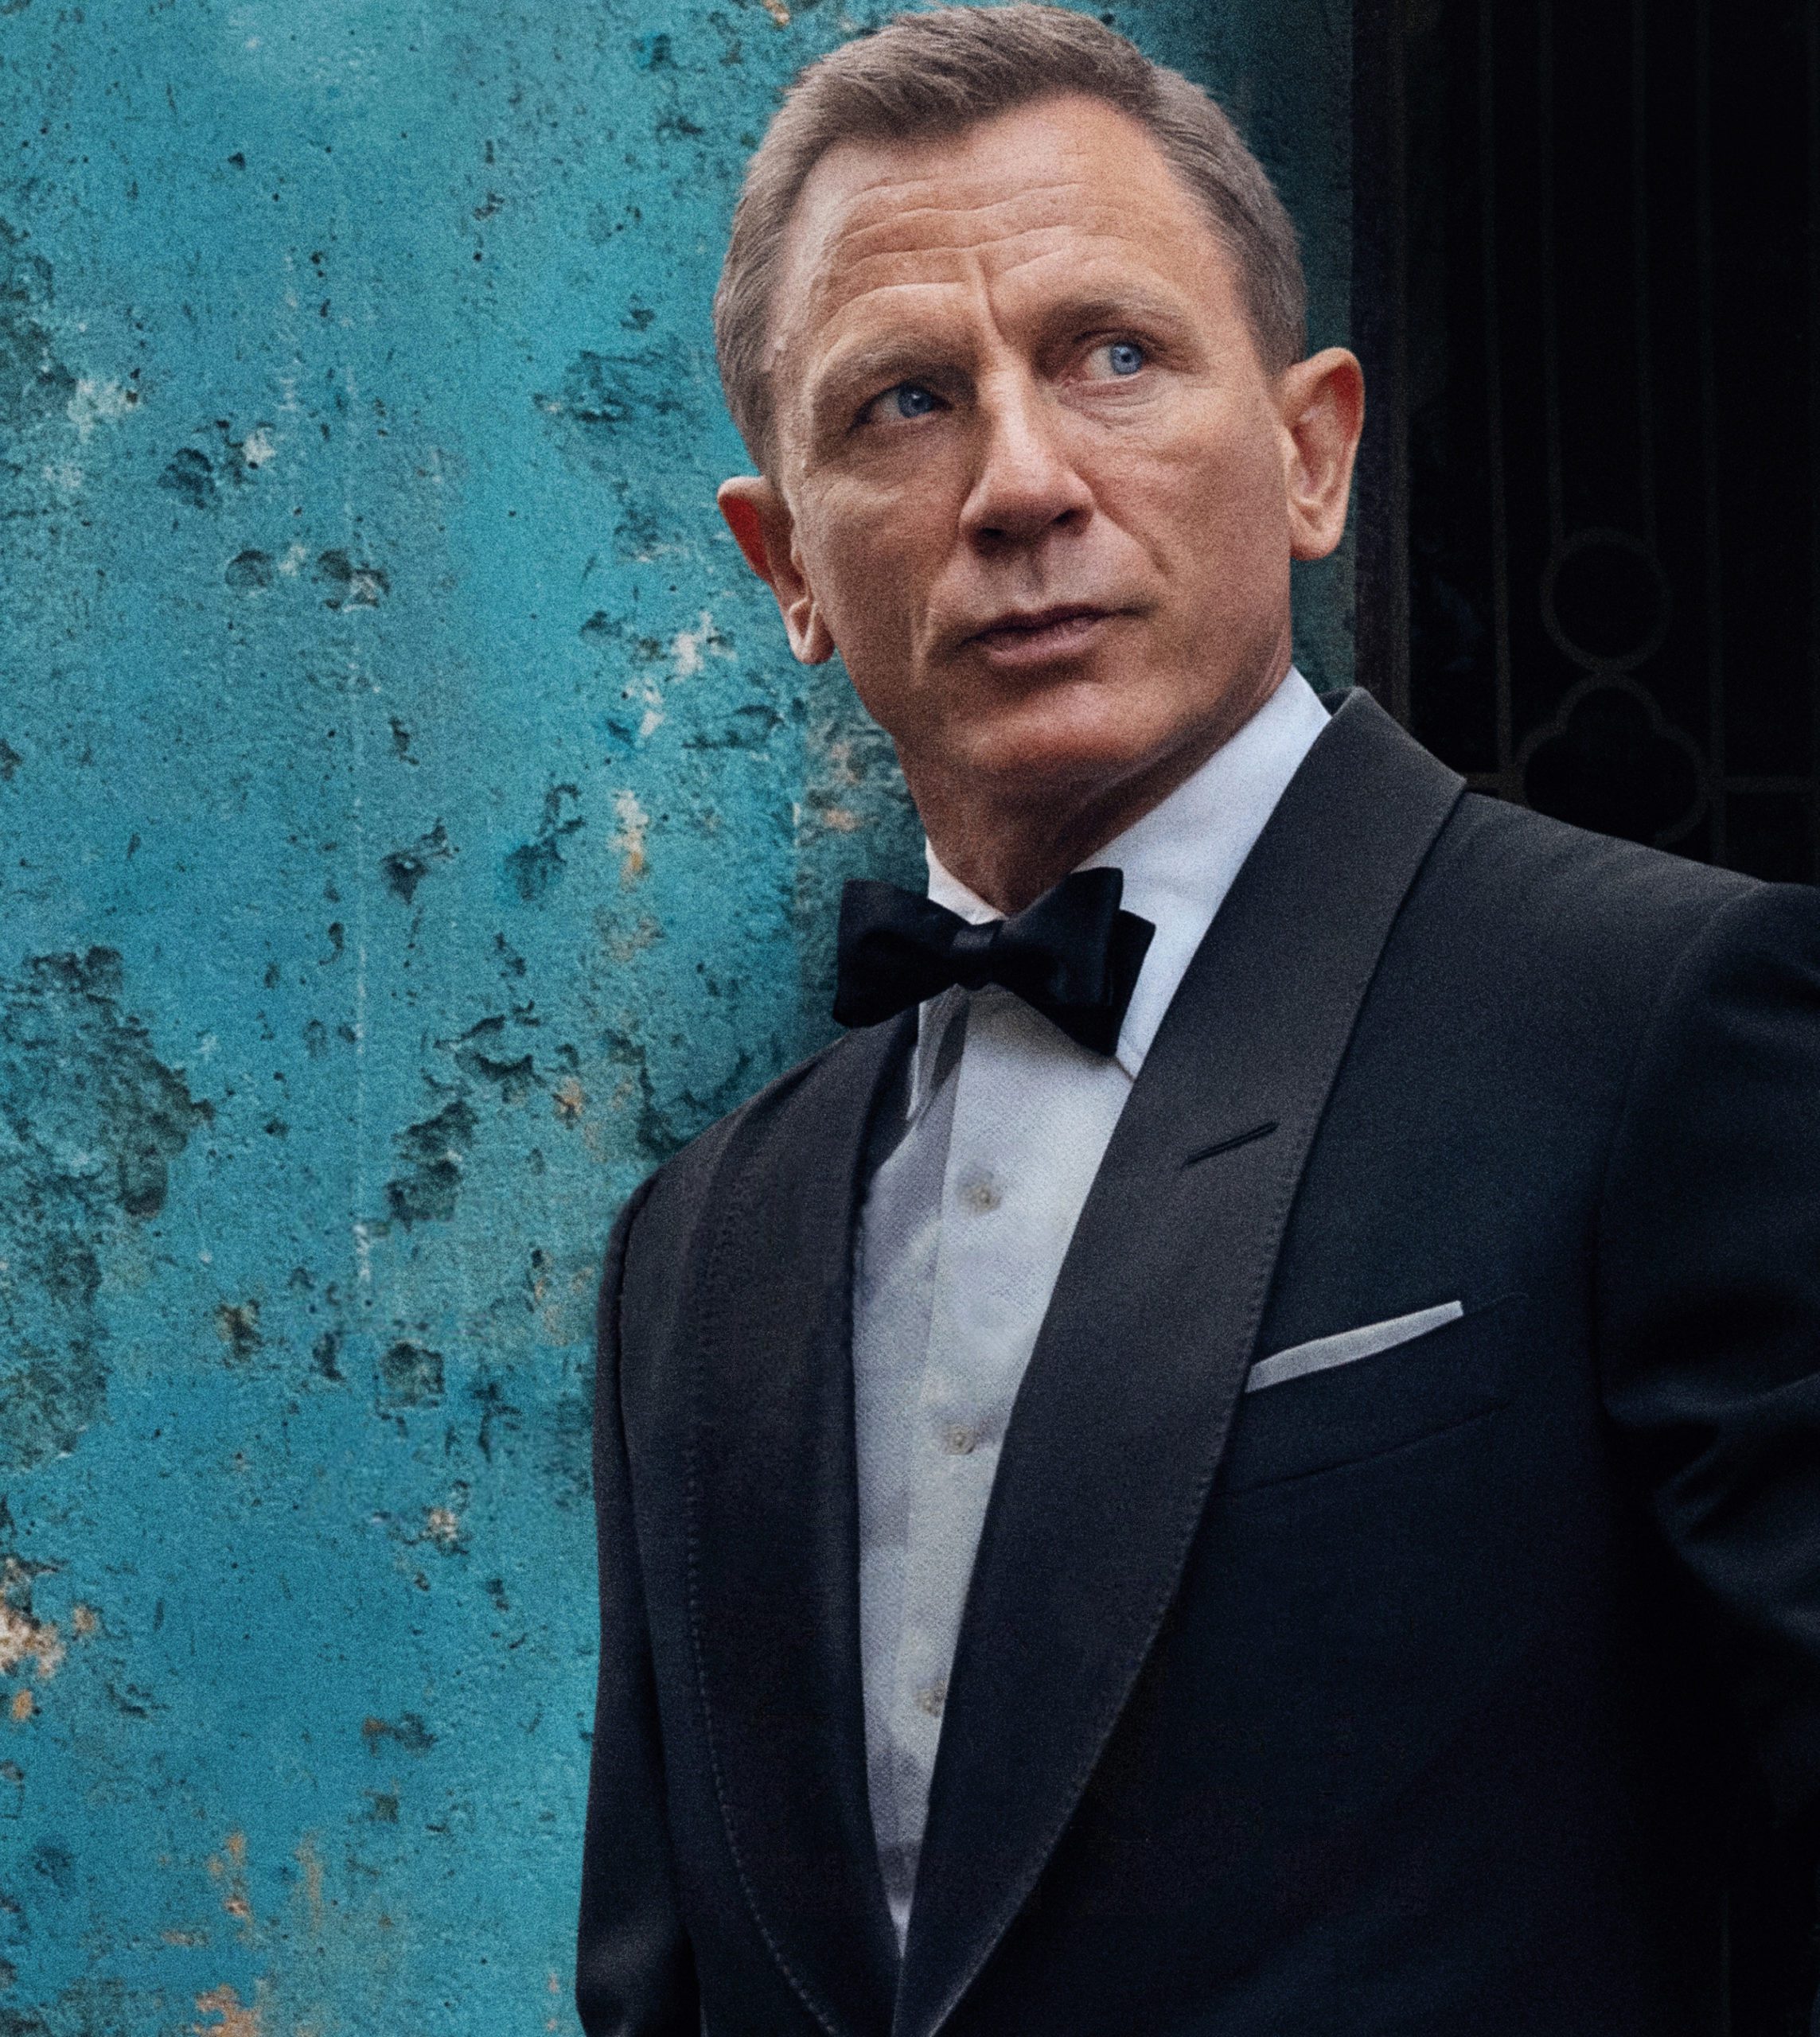 The Evolution of Bond's Suits and Styling | Visual.ly